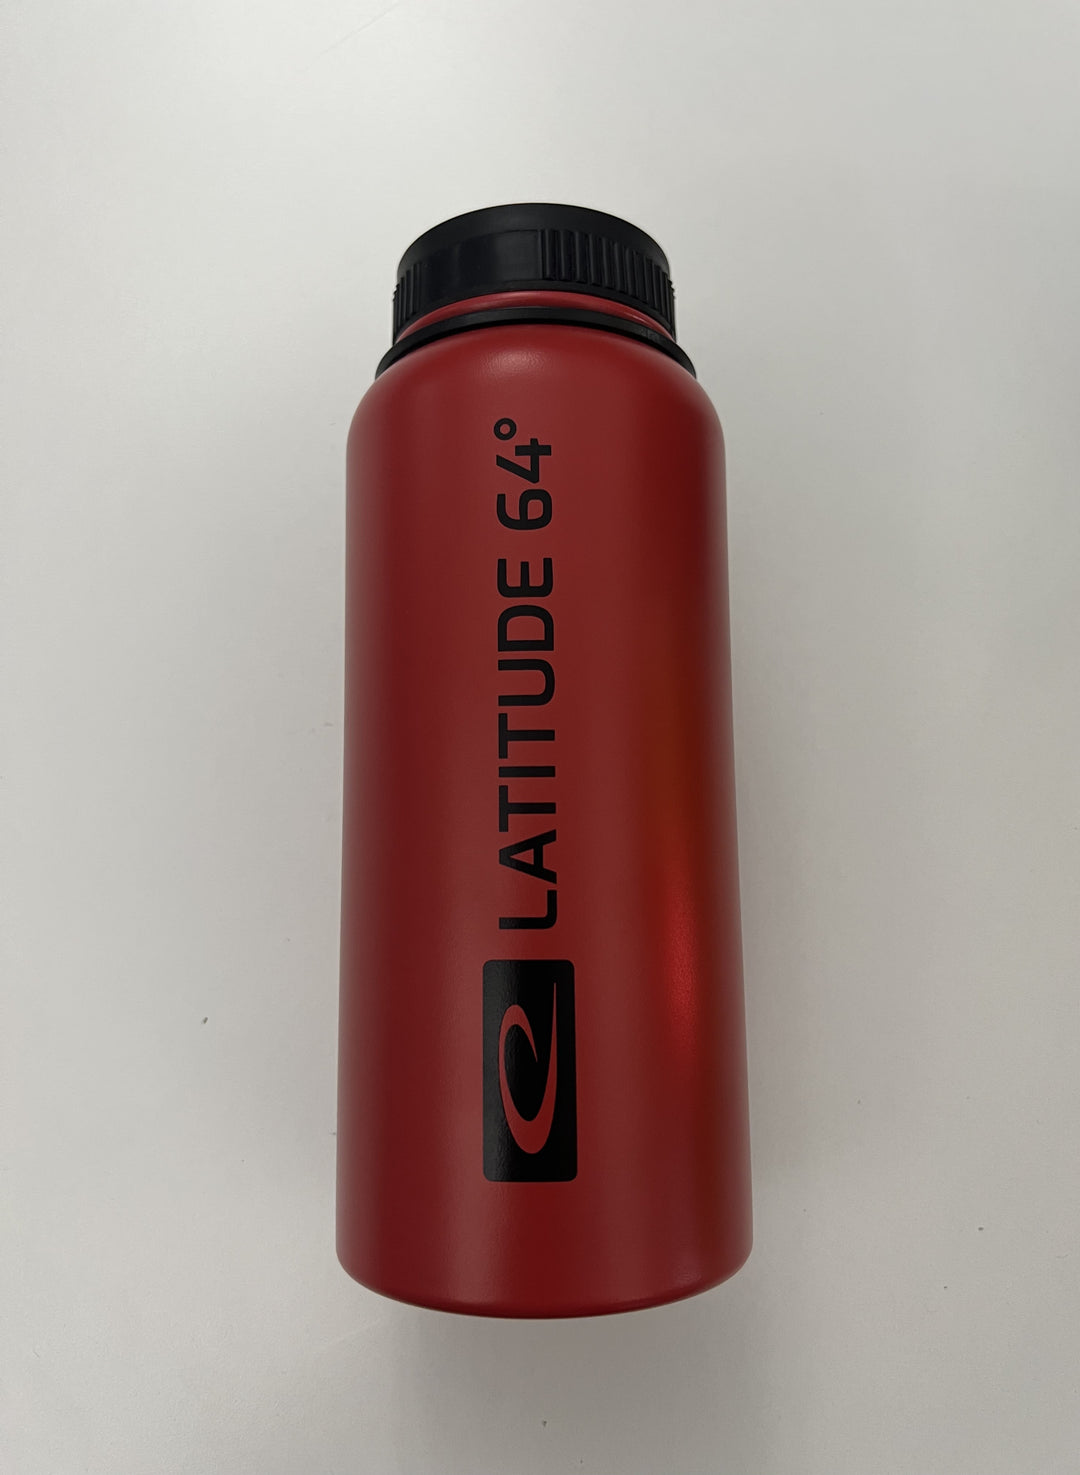 Latitude 64 32oz Stainless Steel Canteen Water Bottle